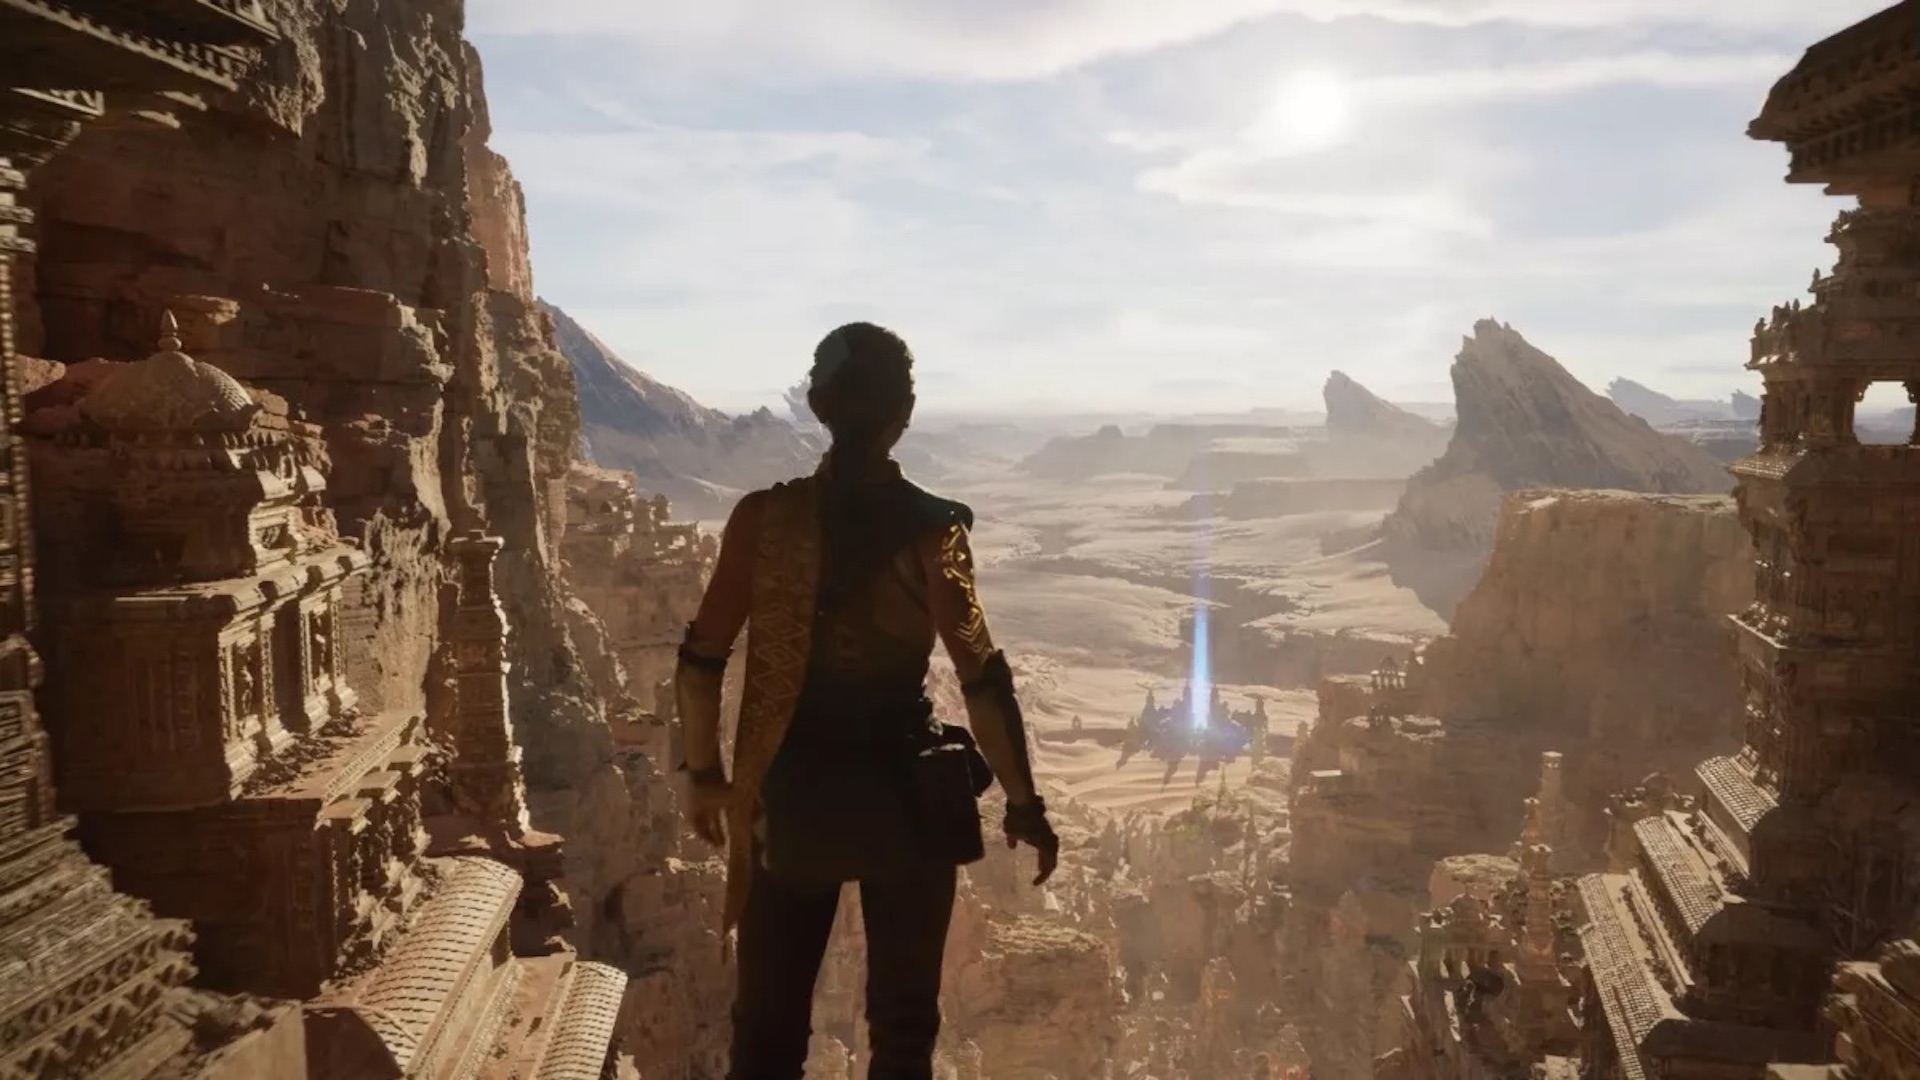 Shot from the Unreal Engine 5 tech demo. A woman steps out into a desert landscape